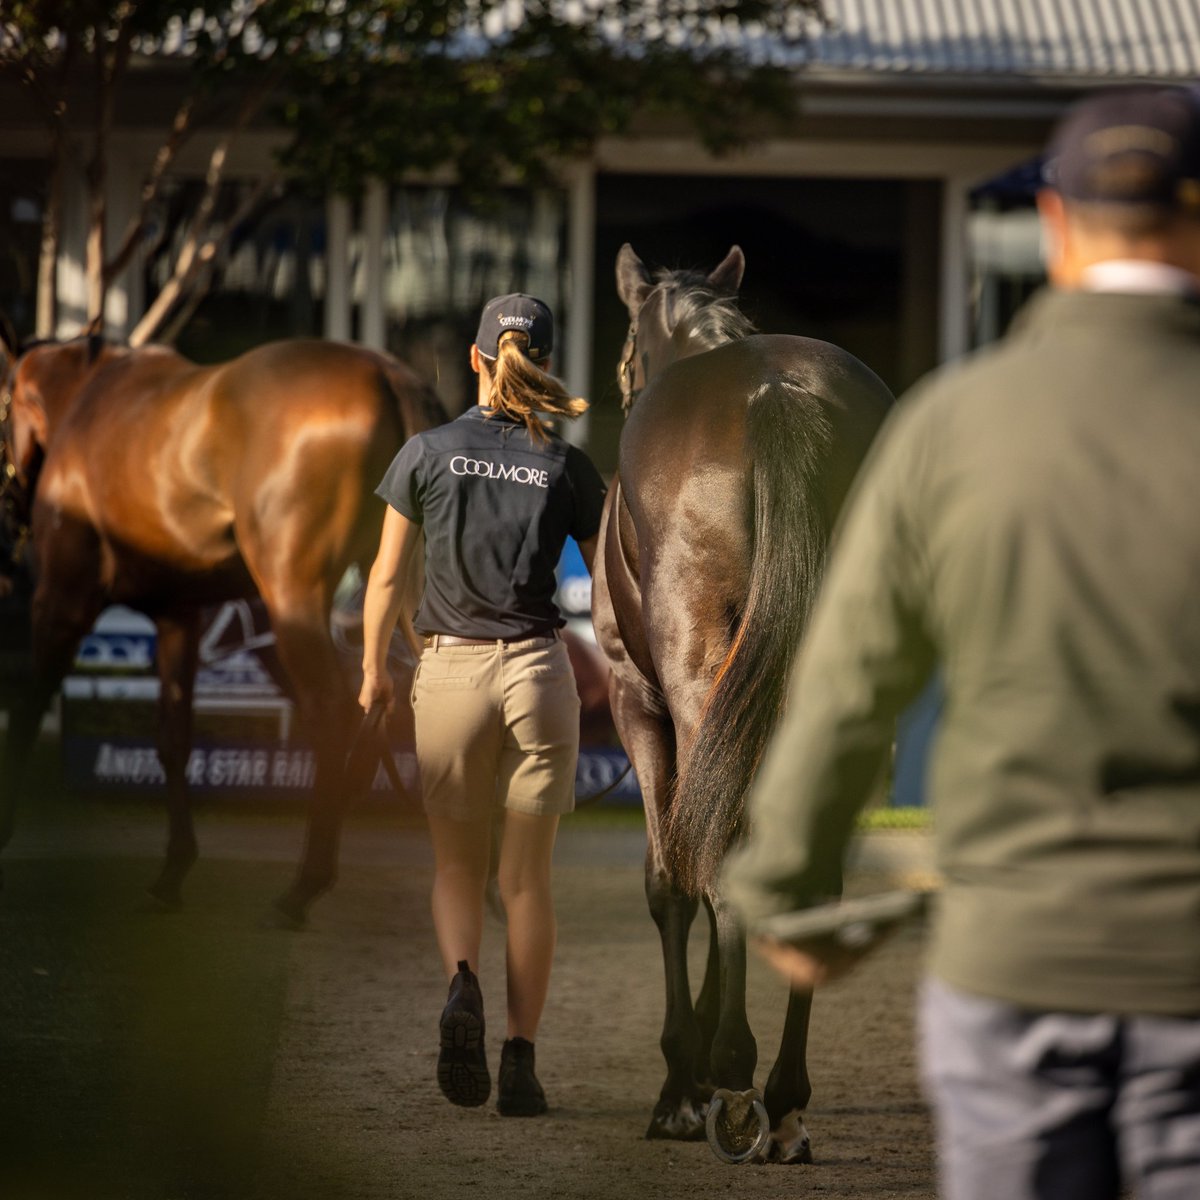 From the mighty WINX to the outstanding STORM BOY, Coolmore yearling sale graduates have been making headlines. Our @inglis_sales Easter draft features yearlings by many of the best proven sires and includes the progeny of 9 Group One-winning mares. #Coolmore #HomeOfChampions